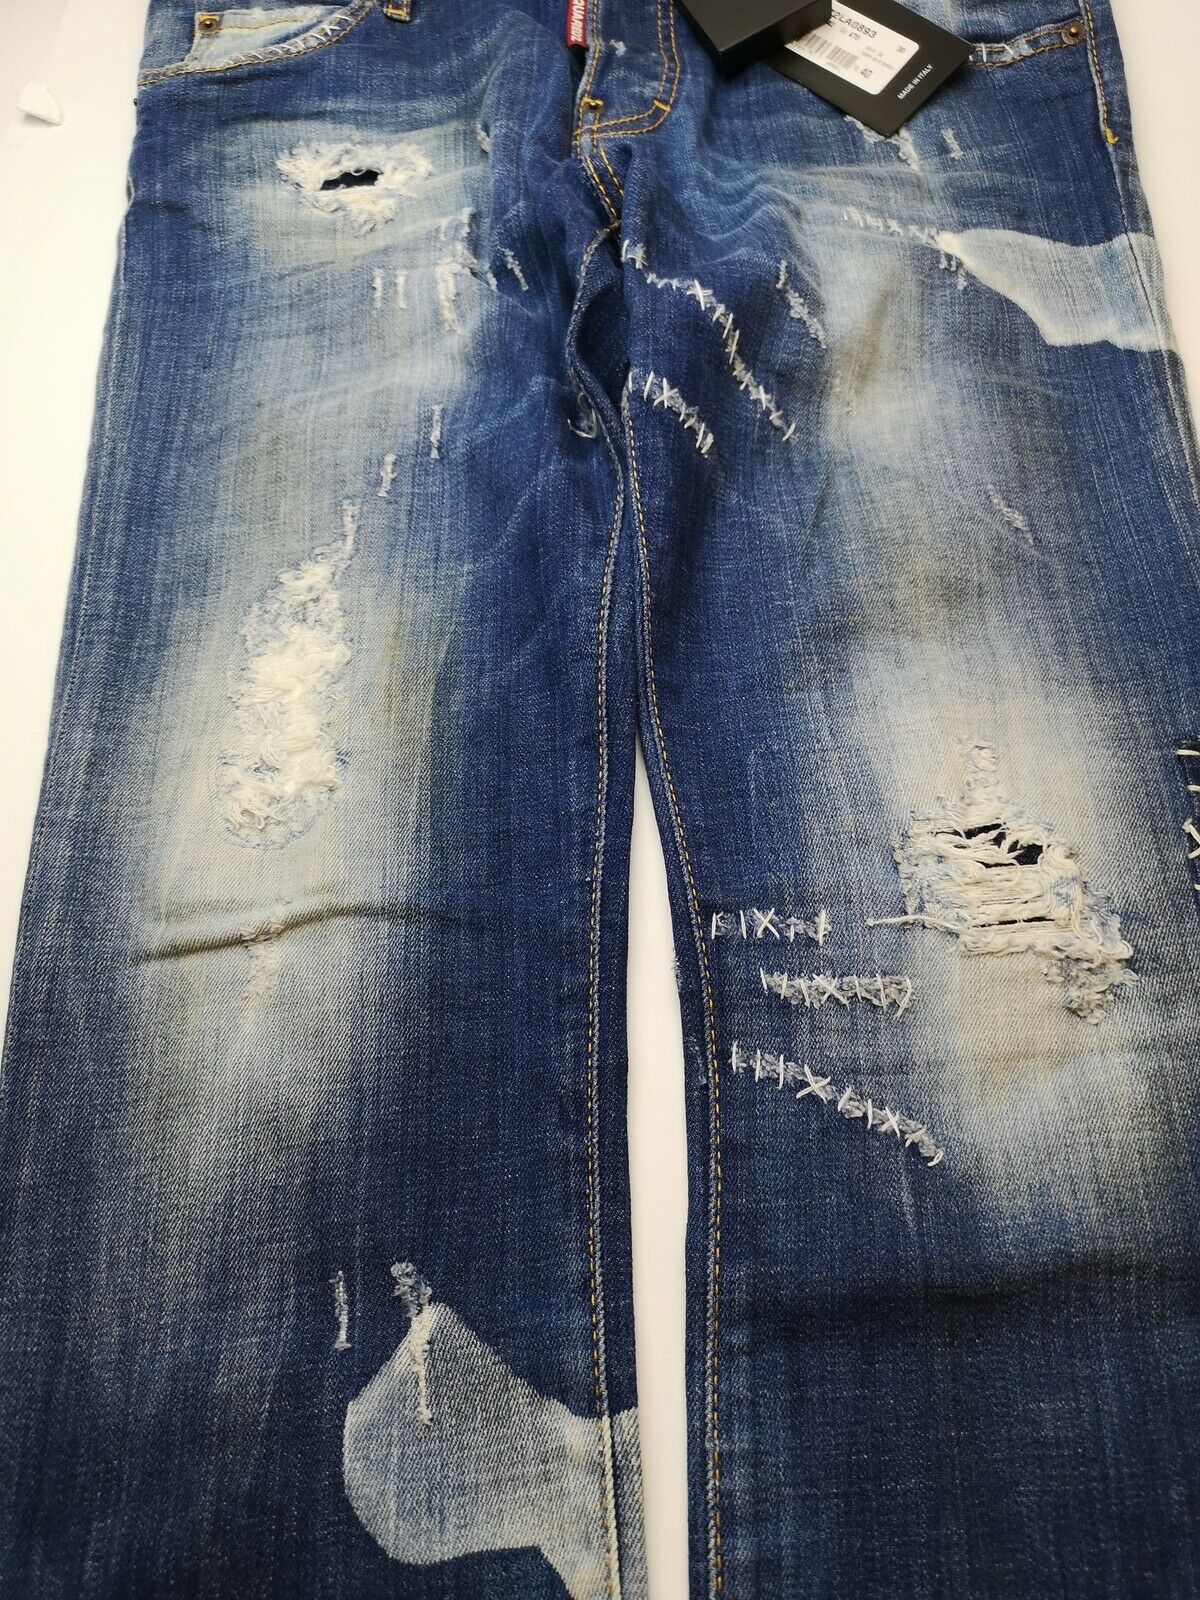 DSQUARED2 Jeans Size S Stretch Made in Italy